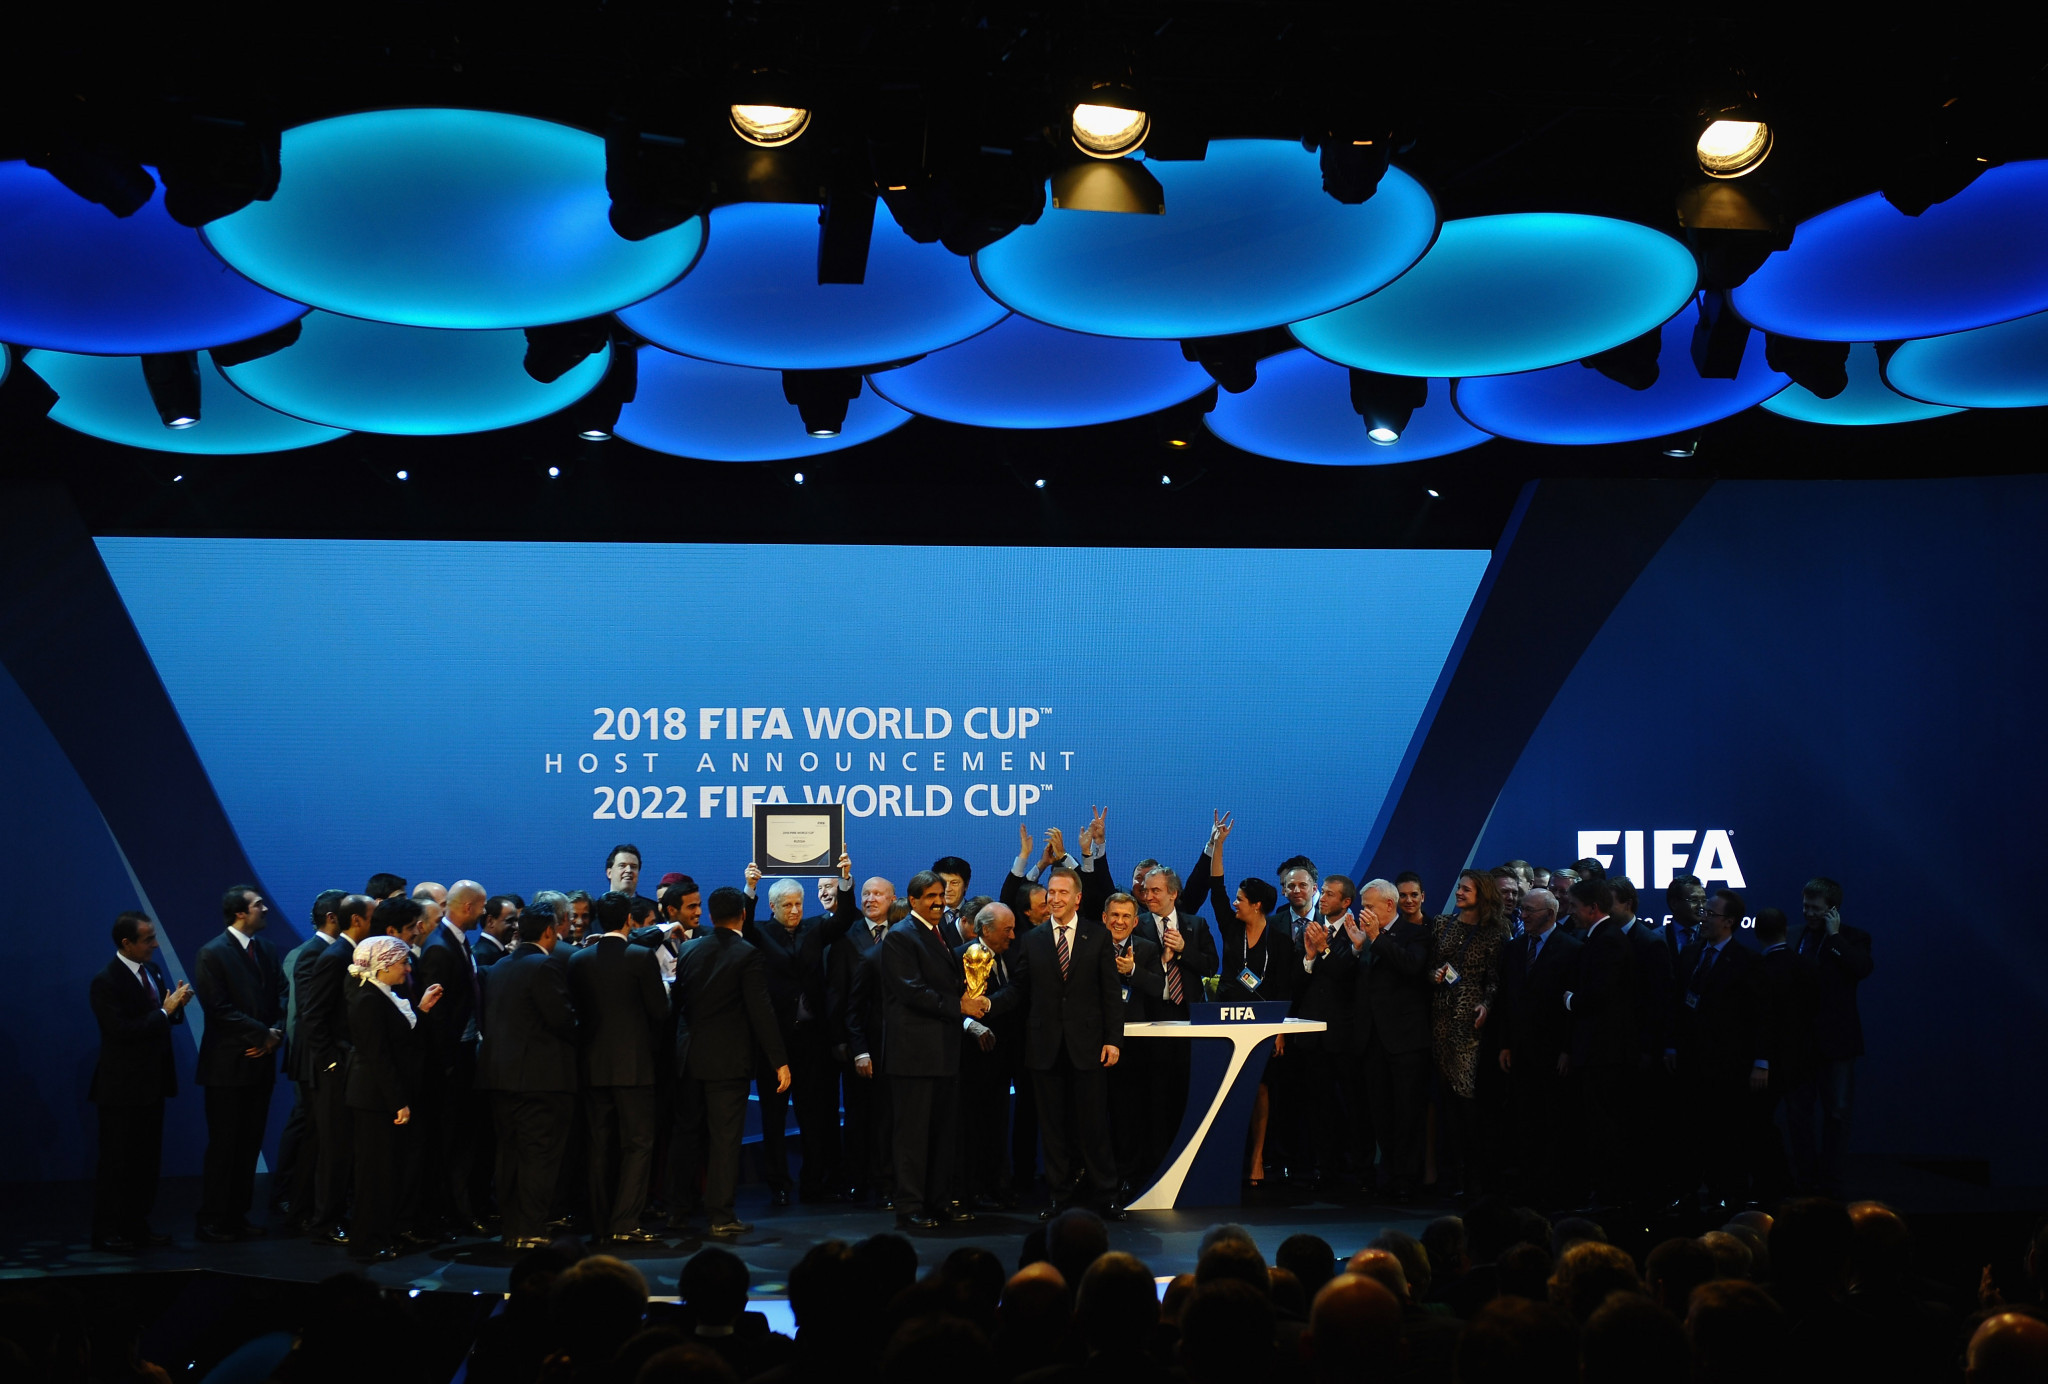 Russia and Qatar were awarded the 2018 and 2022 FIFA World Cups in an acrimonious double award in 2010 ©Getty Images 